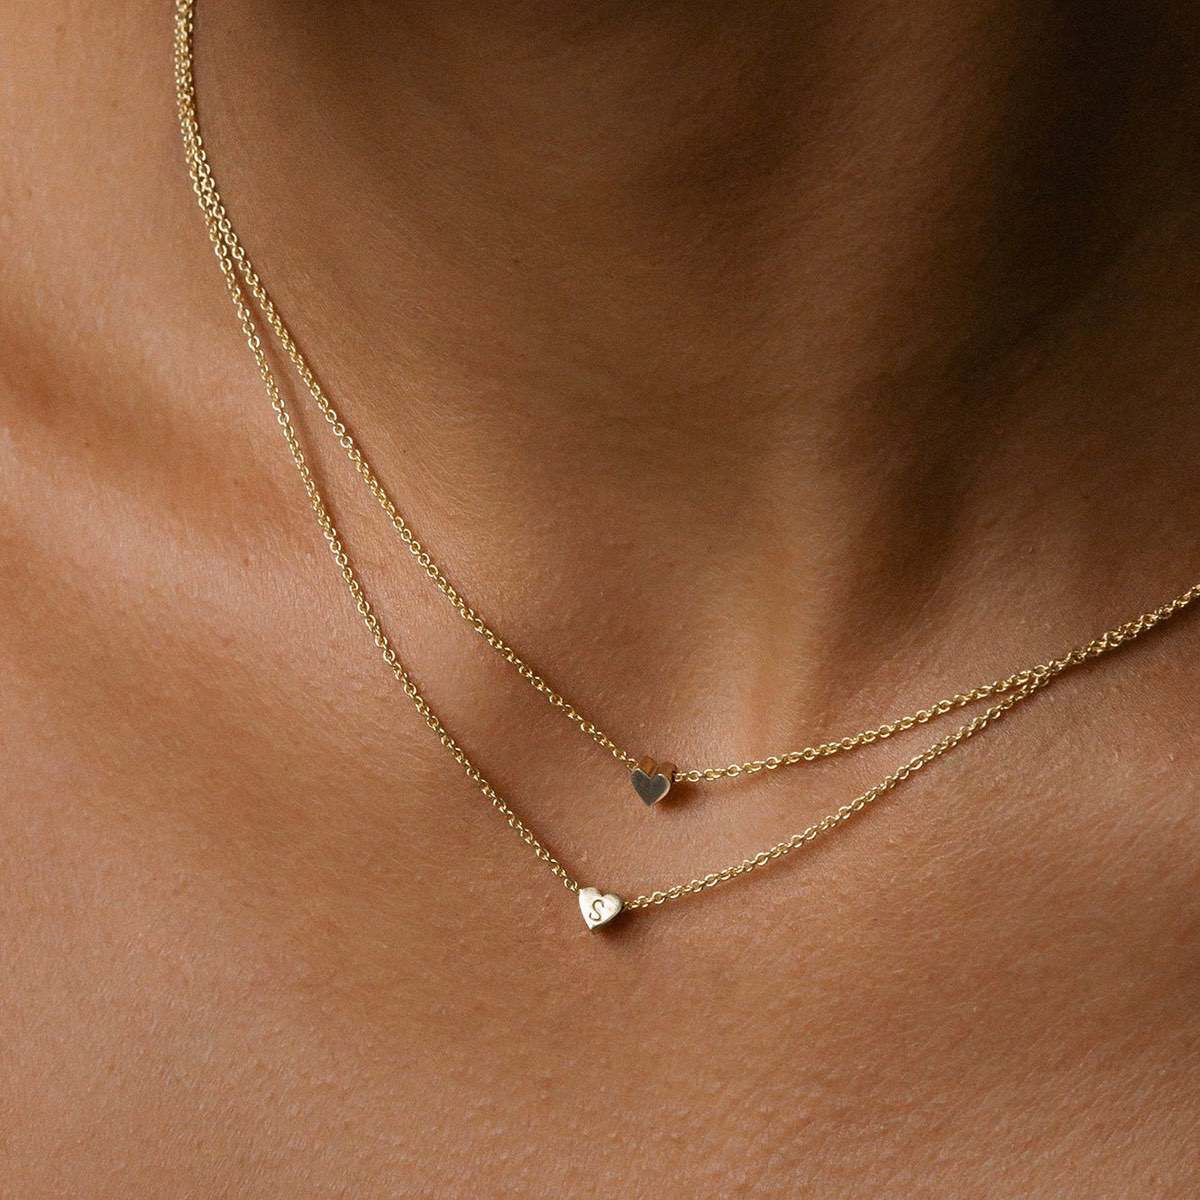 Solid Yellow, Rose & White Gold Heart Charm Necklace: High quality hand-finished jewellery layered on neck